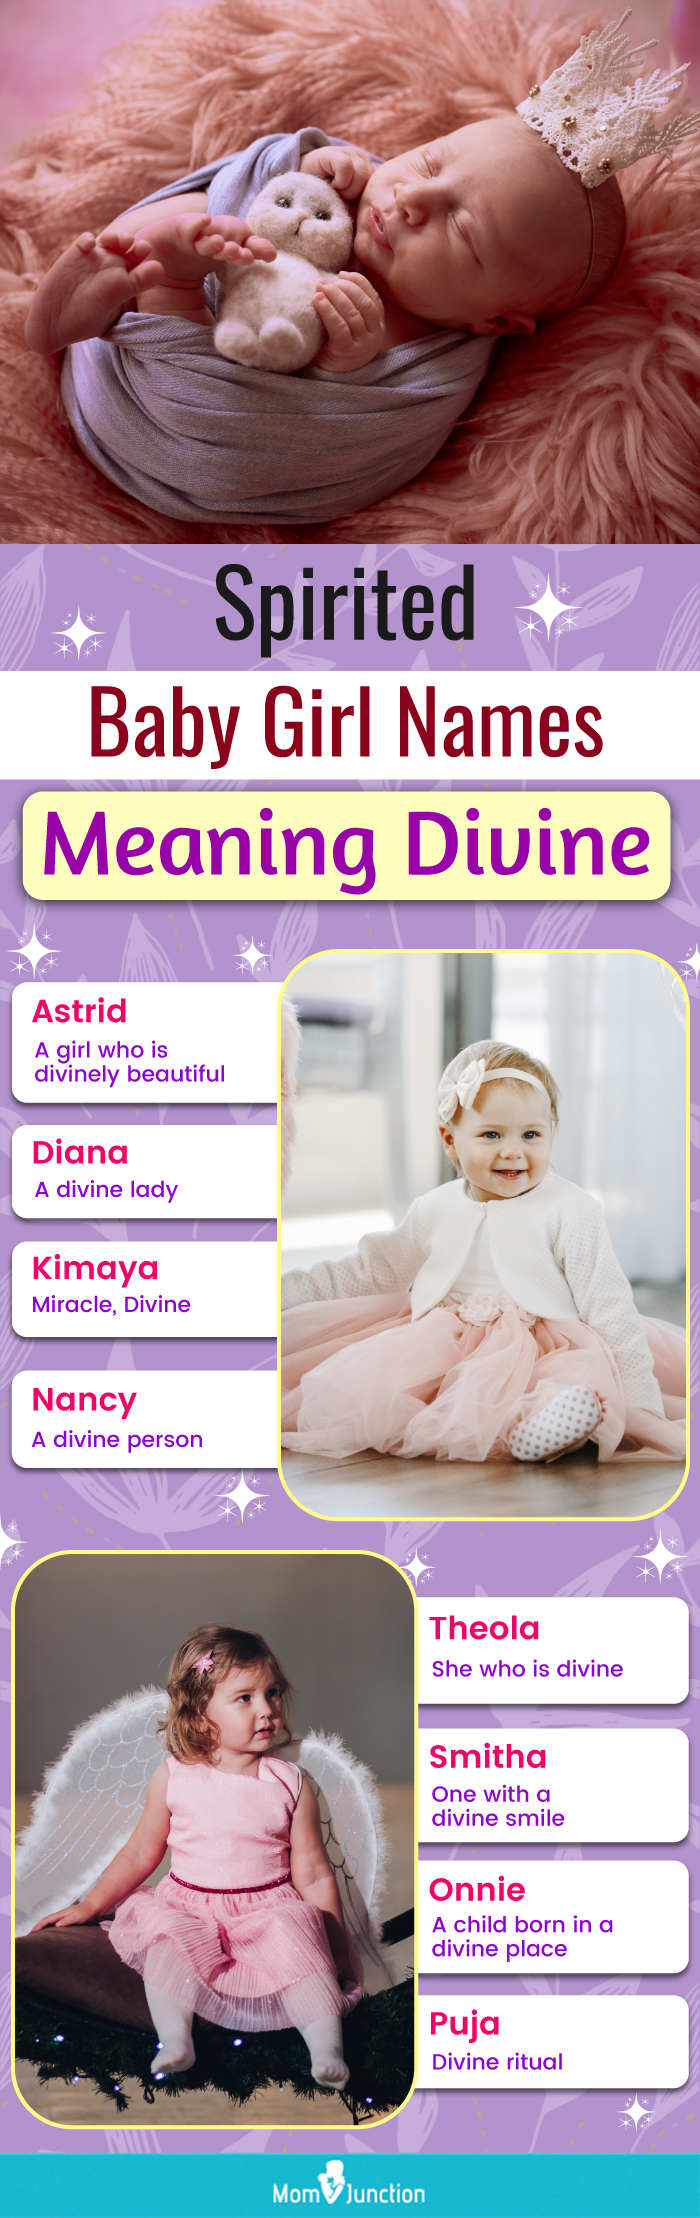 spirited baby girl names meaning divine (infographic)